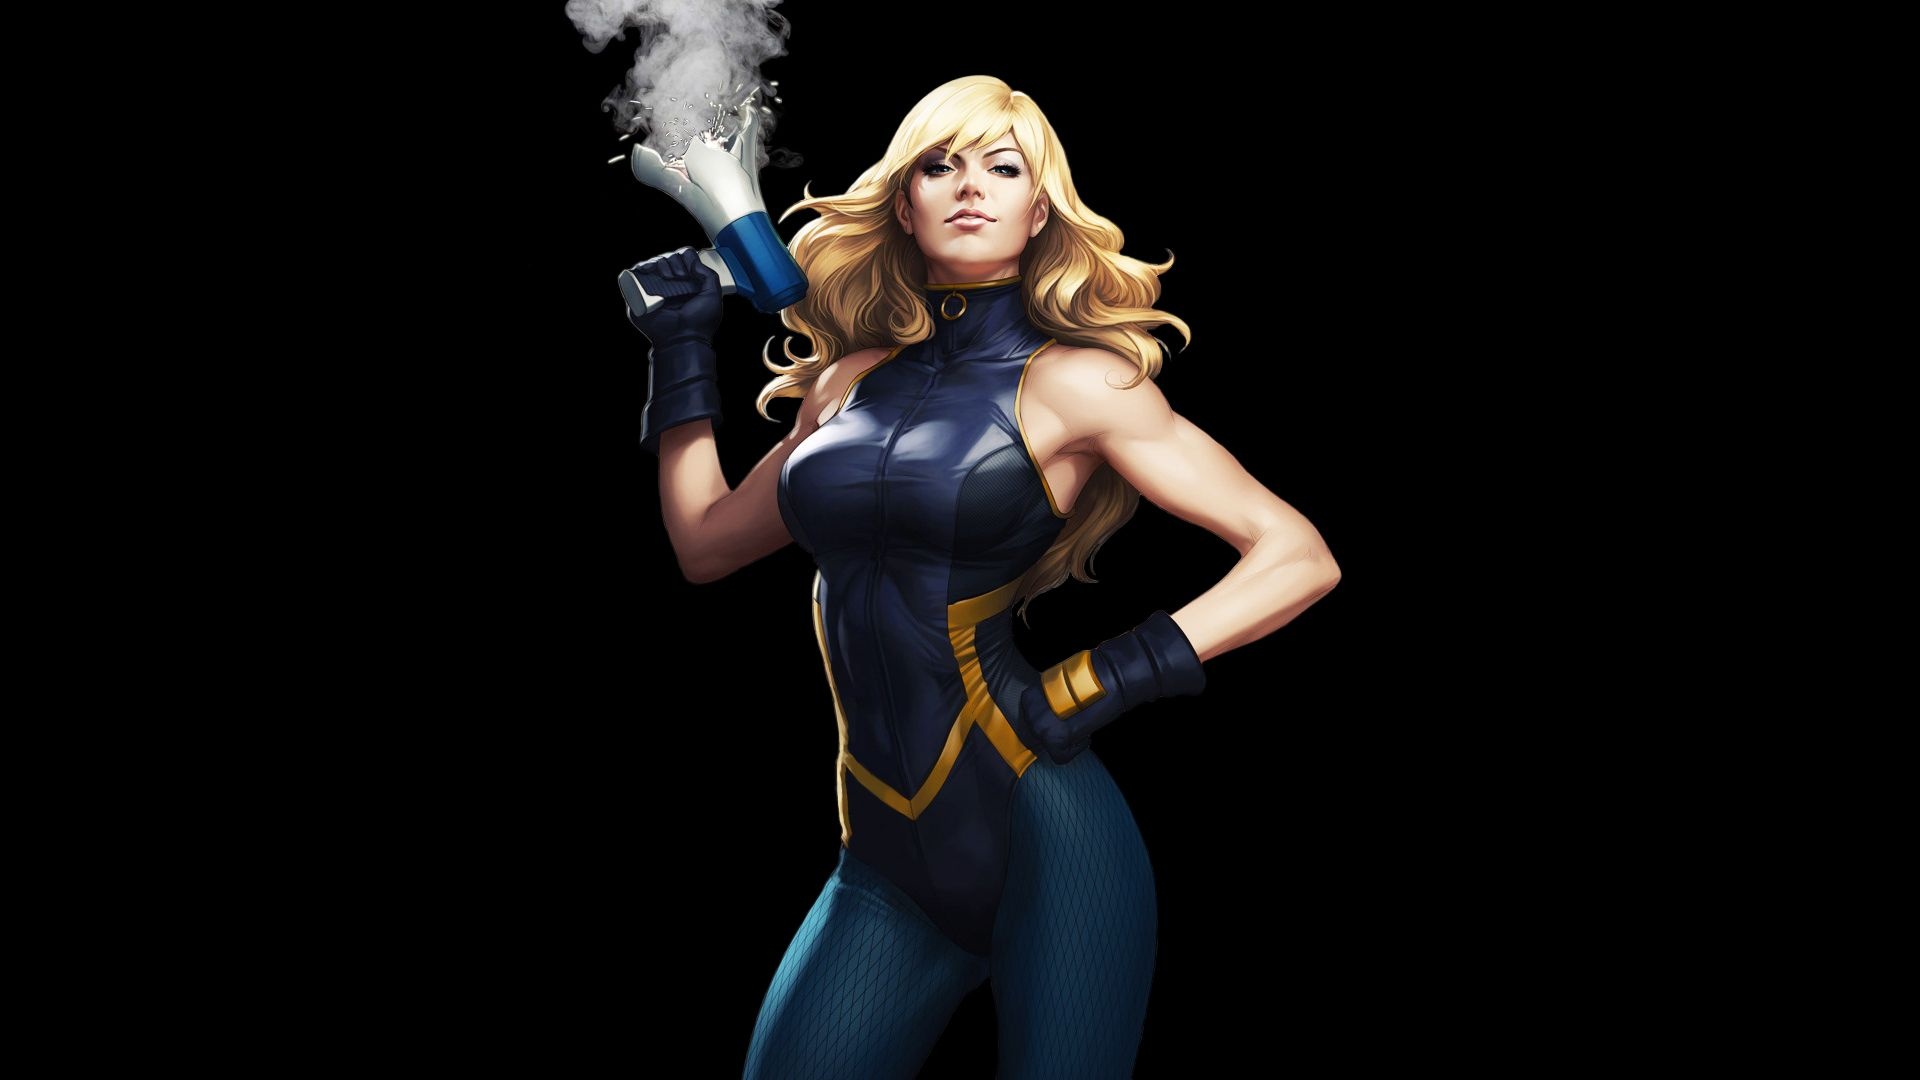 Awesome Black Canary, Wallpapers, Backgrounds, HD, 1920x1080 Full HD Desktop